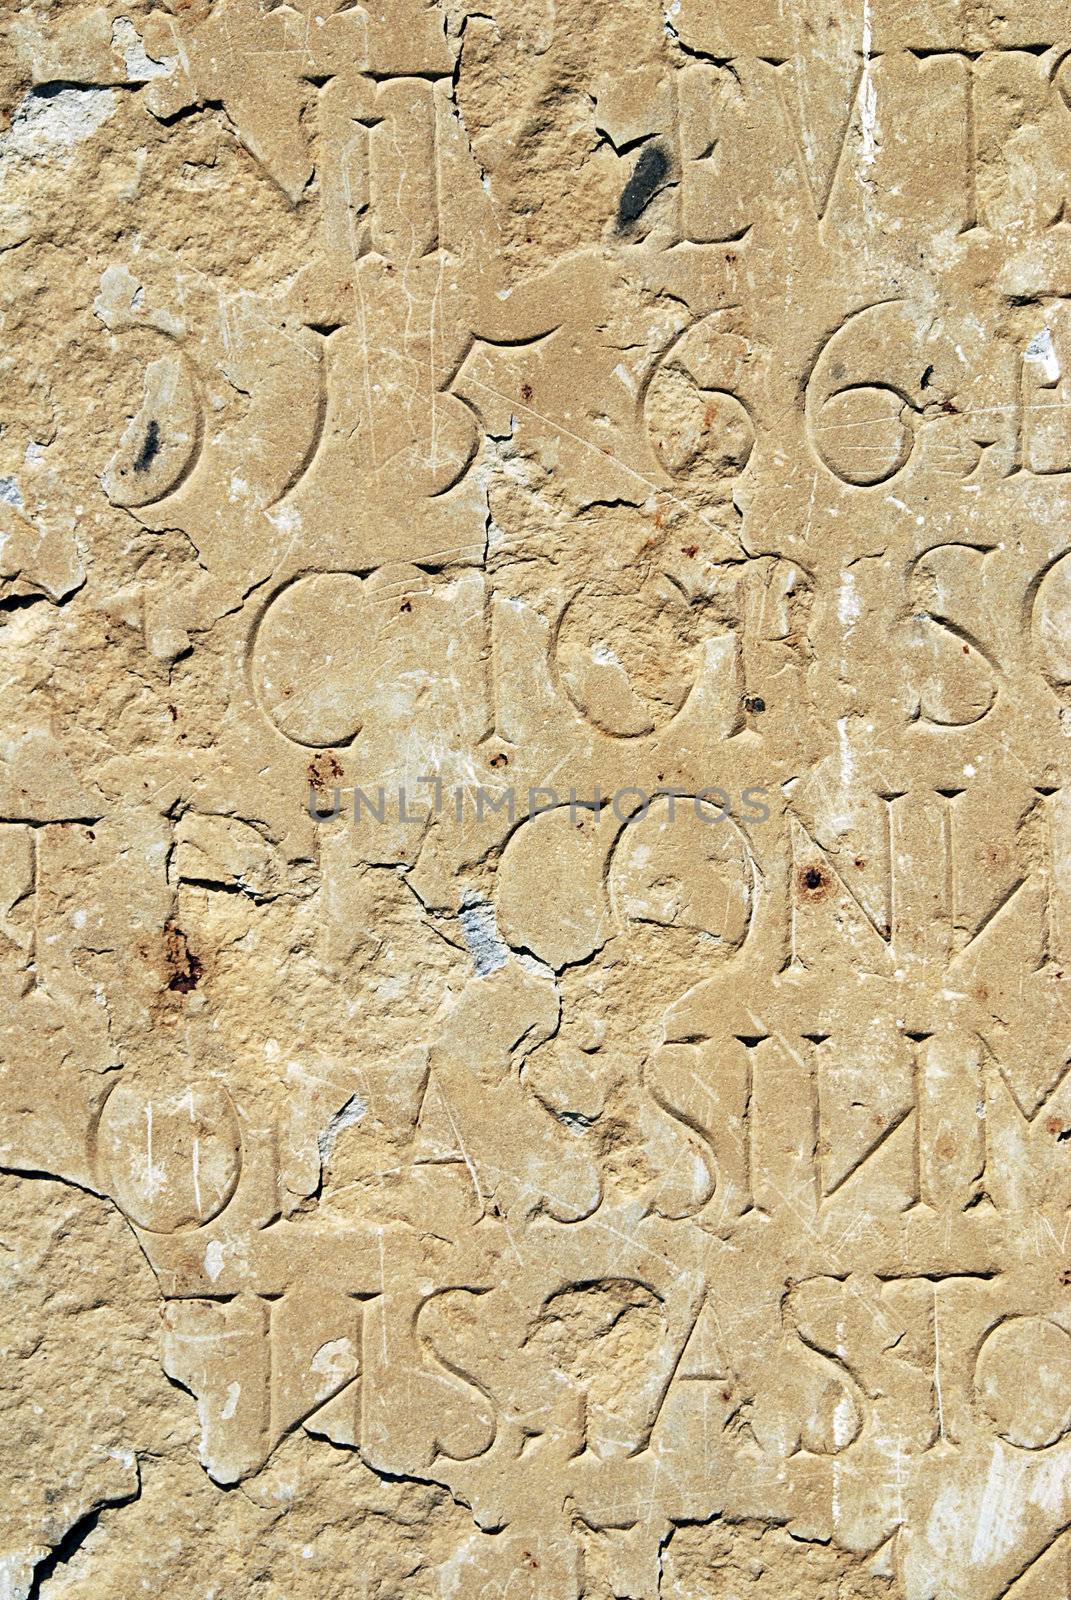 Ancient inscription by fyletto